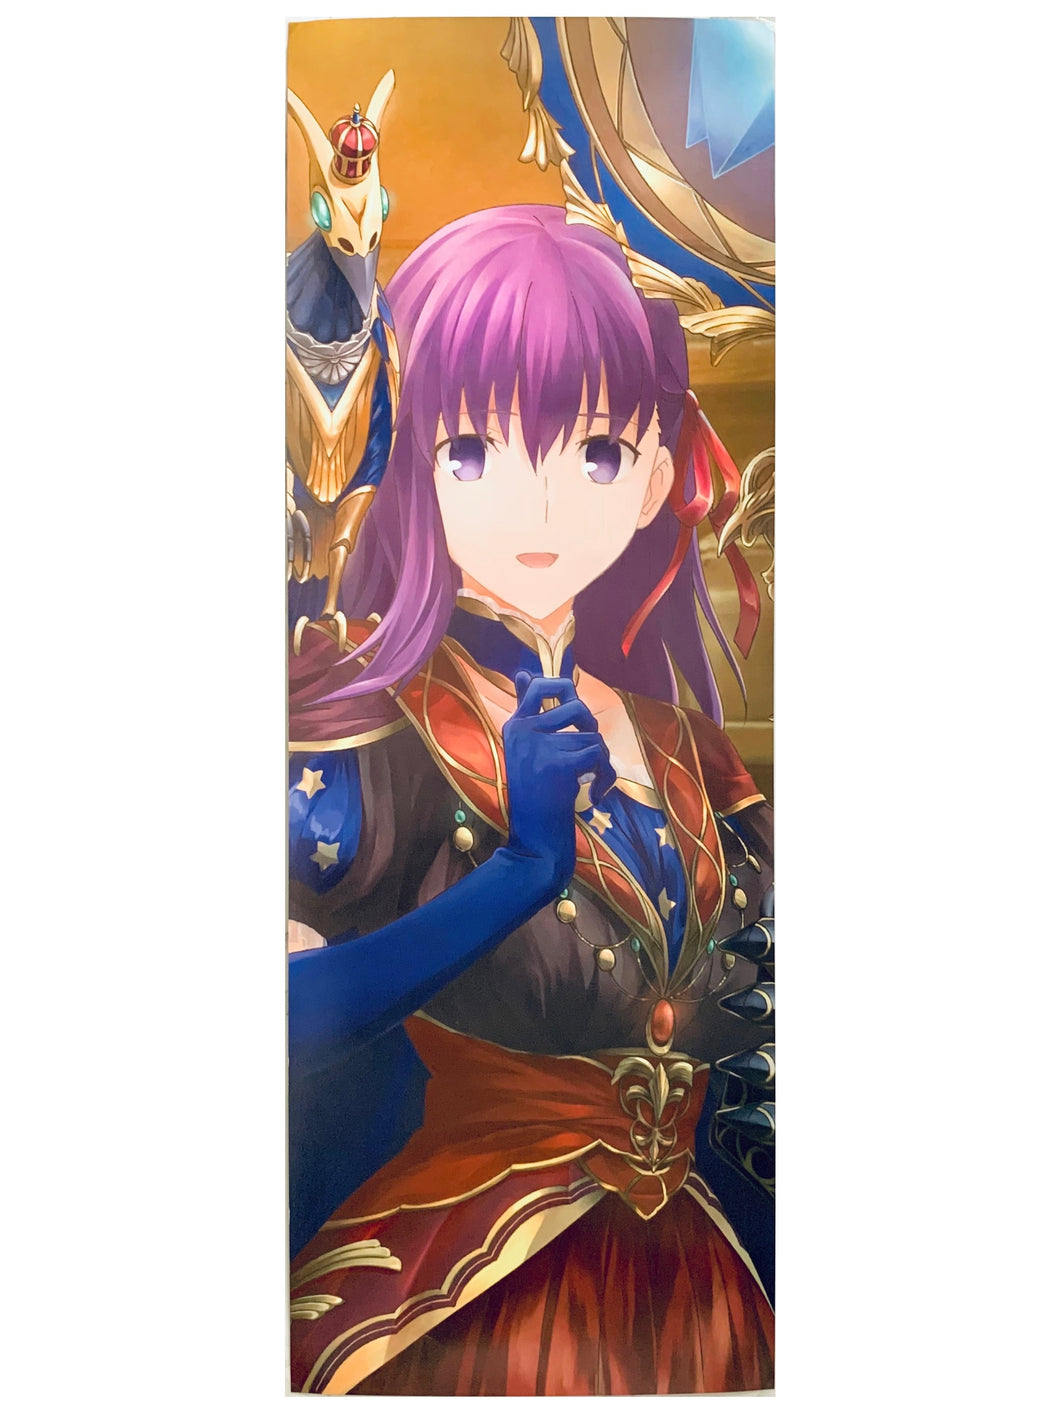 Gekijouban Fate/stay Night Heaven's Feel - Matou Sakura - F/sn x F/GO Collaboration Poster Part 1 (2 pieces set) - 4th Week Visitor Special